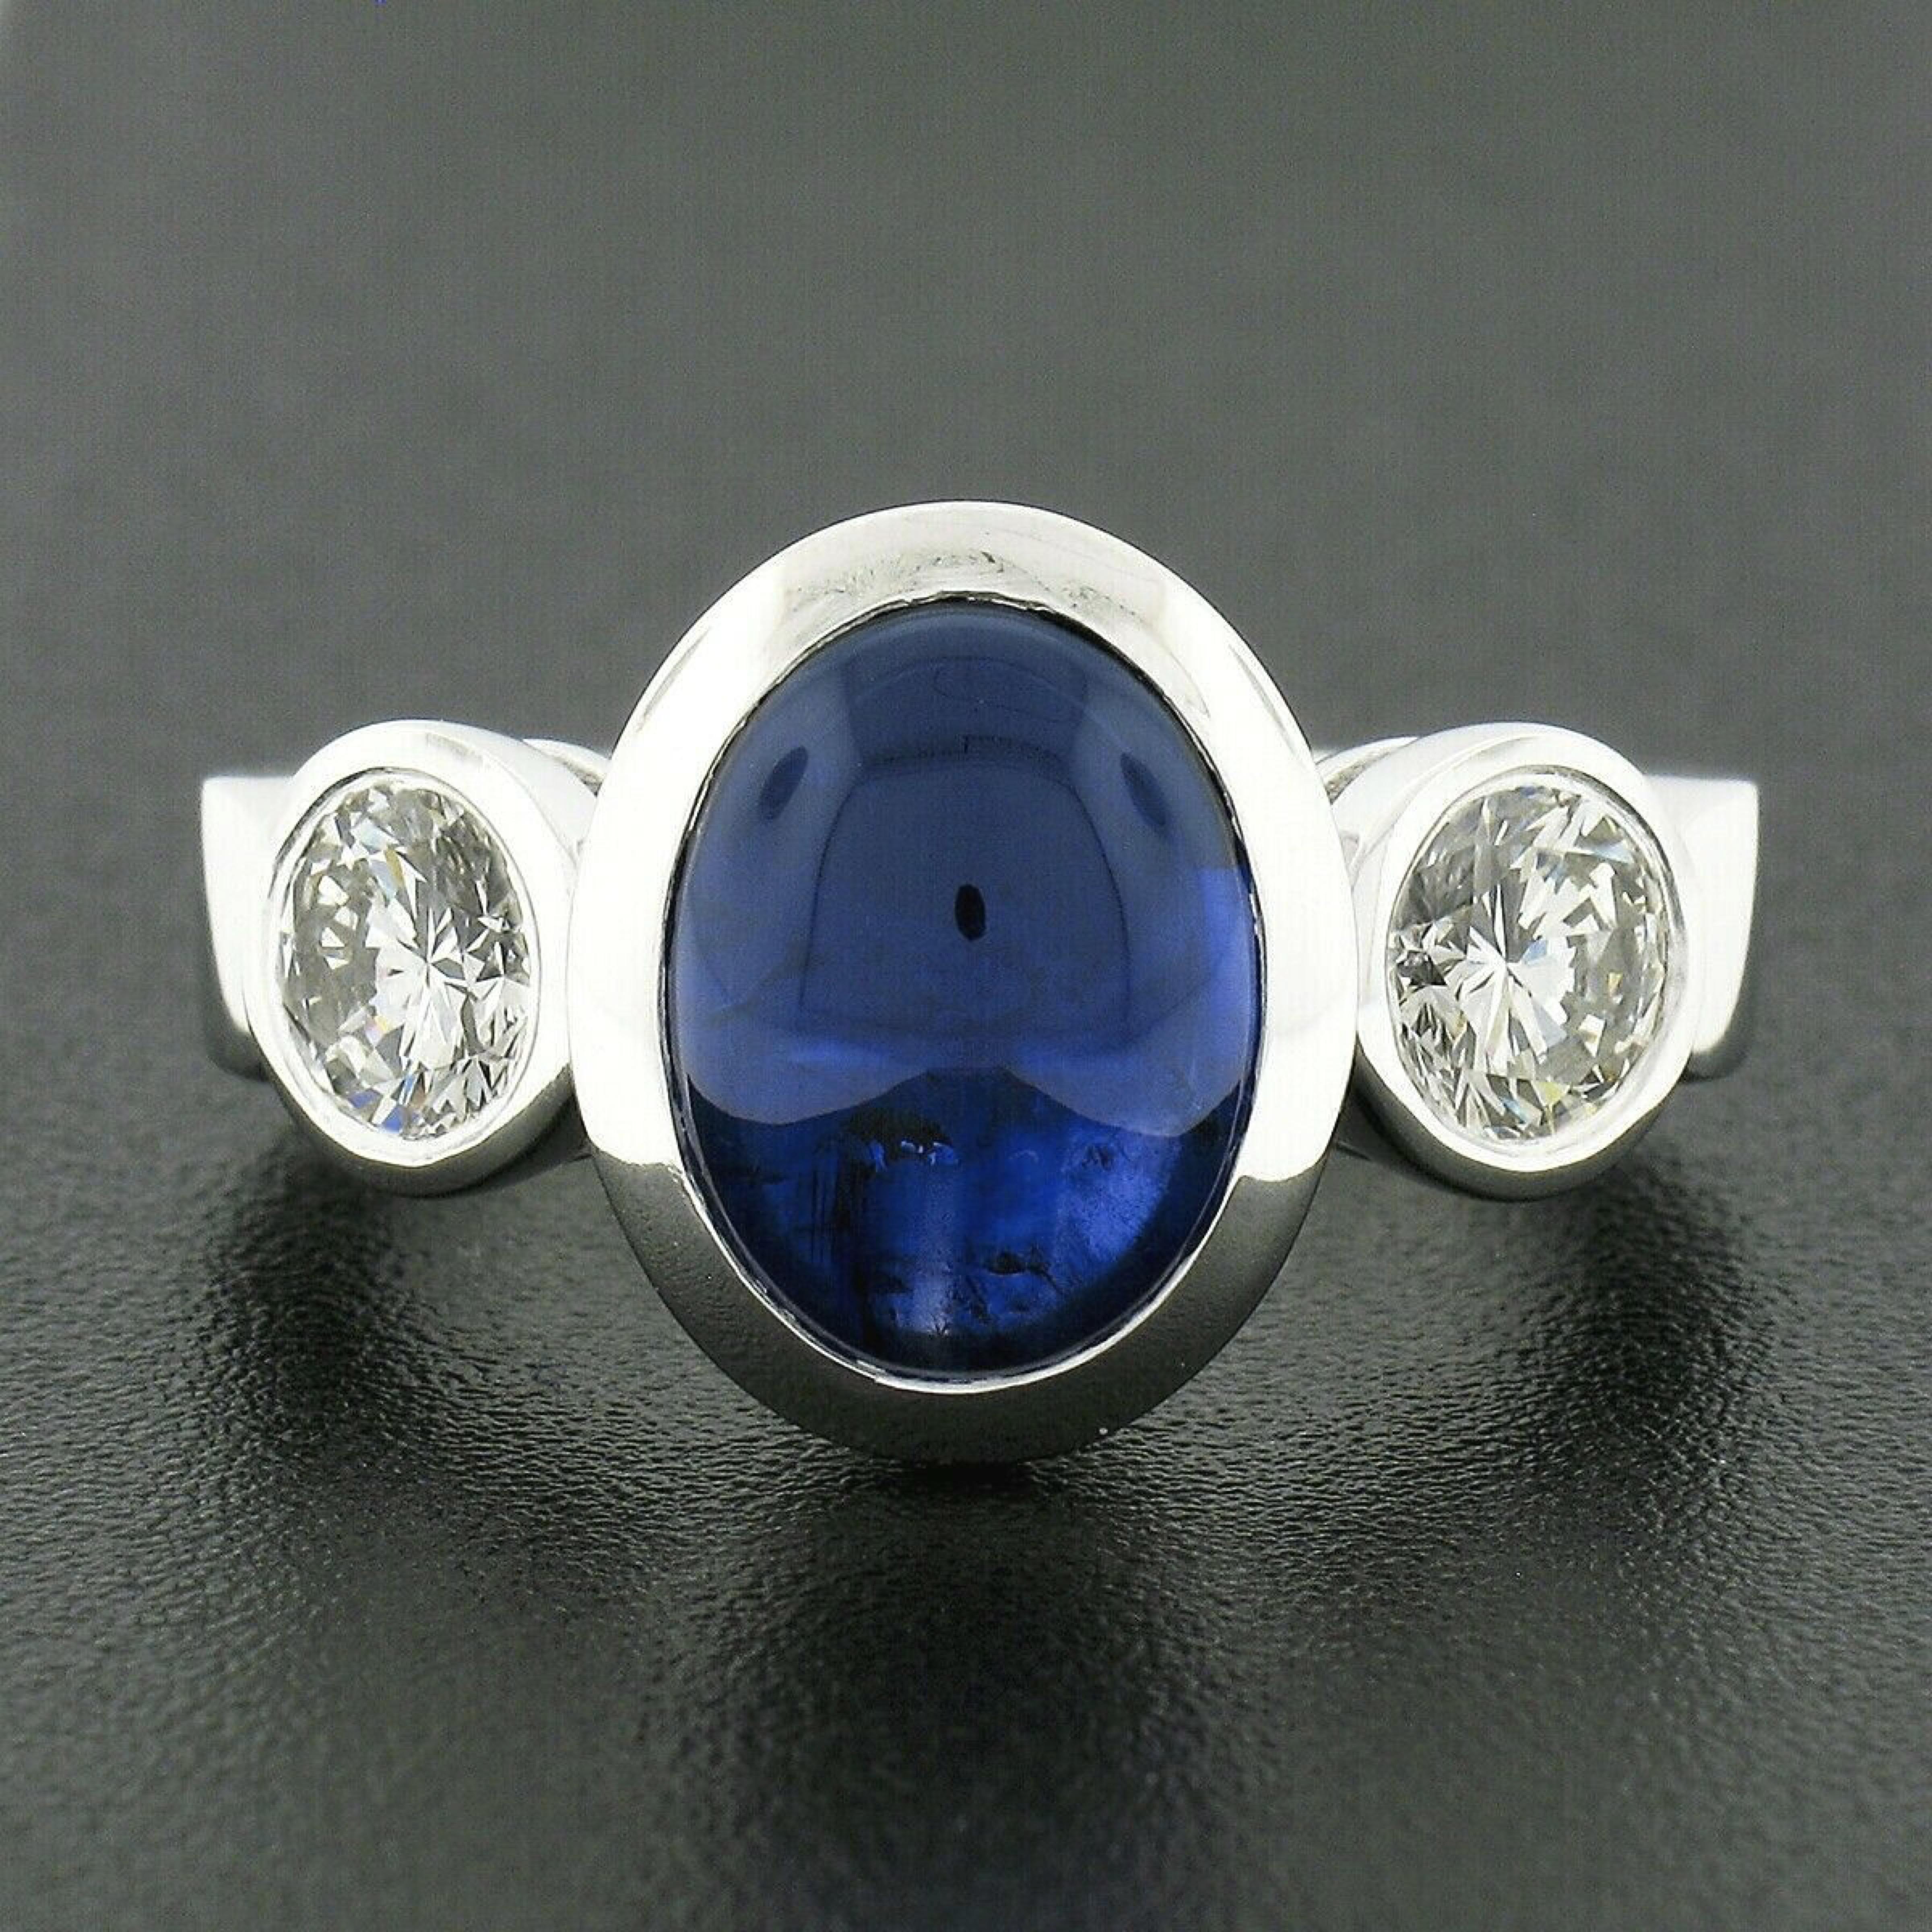 This gorgeous and very well made three-stone ring is newly crafted in solid platinum and features a magnificent, Gubelin certified, natural sapphire stone perfectly bezel set at its center. The oval cabochon cut sapphire is certified as weighing